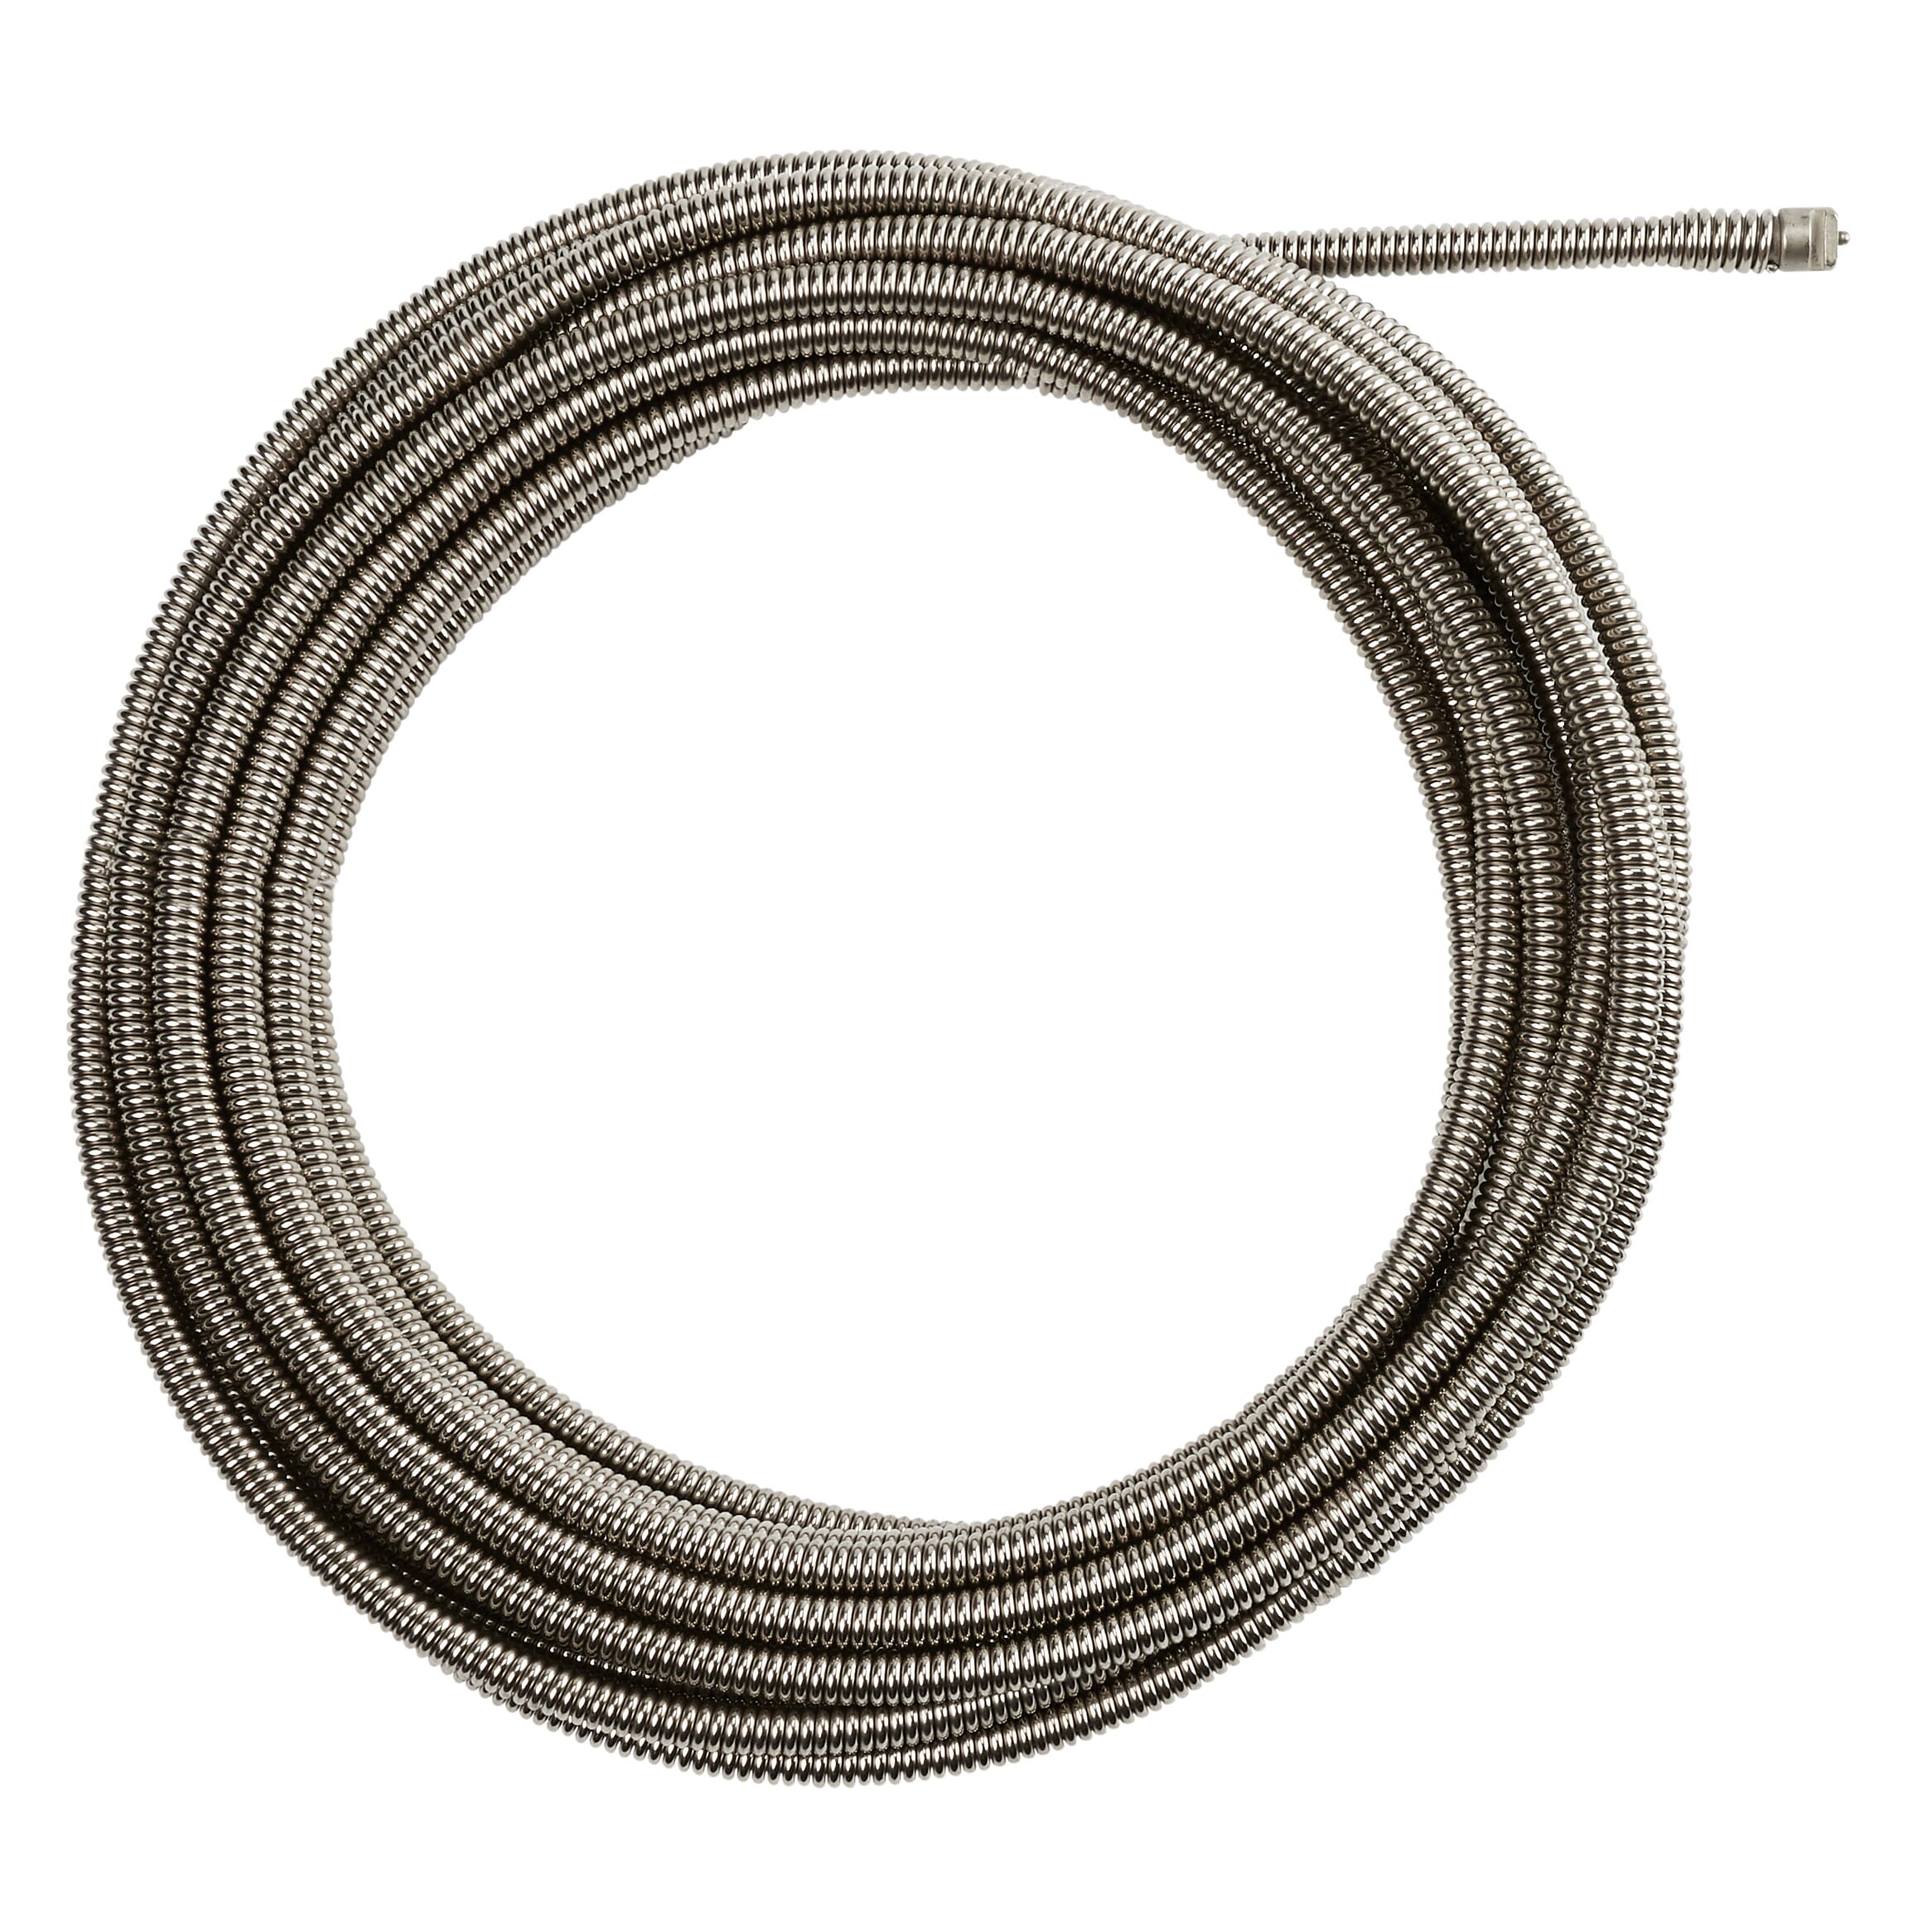 Milwaukee® 48-53-2676 Inner Core Coupling Drain Cleaning Cable, 3/8 in, Steel, For Use With Drain Cleaning Machines, 1-1/4 to 2-1/2 in Drain Line